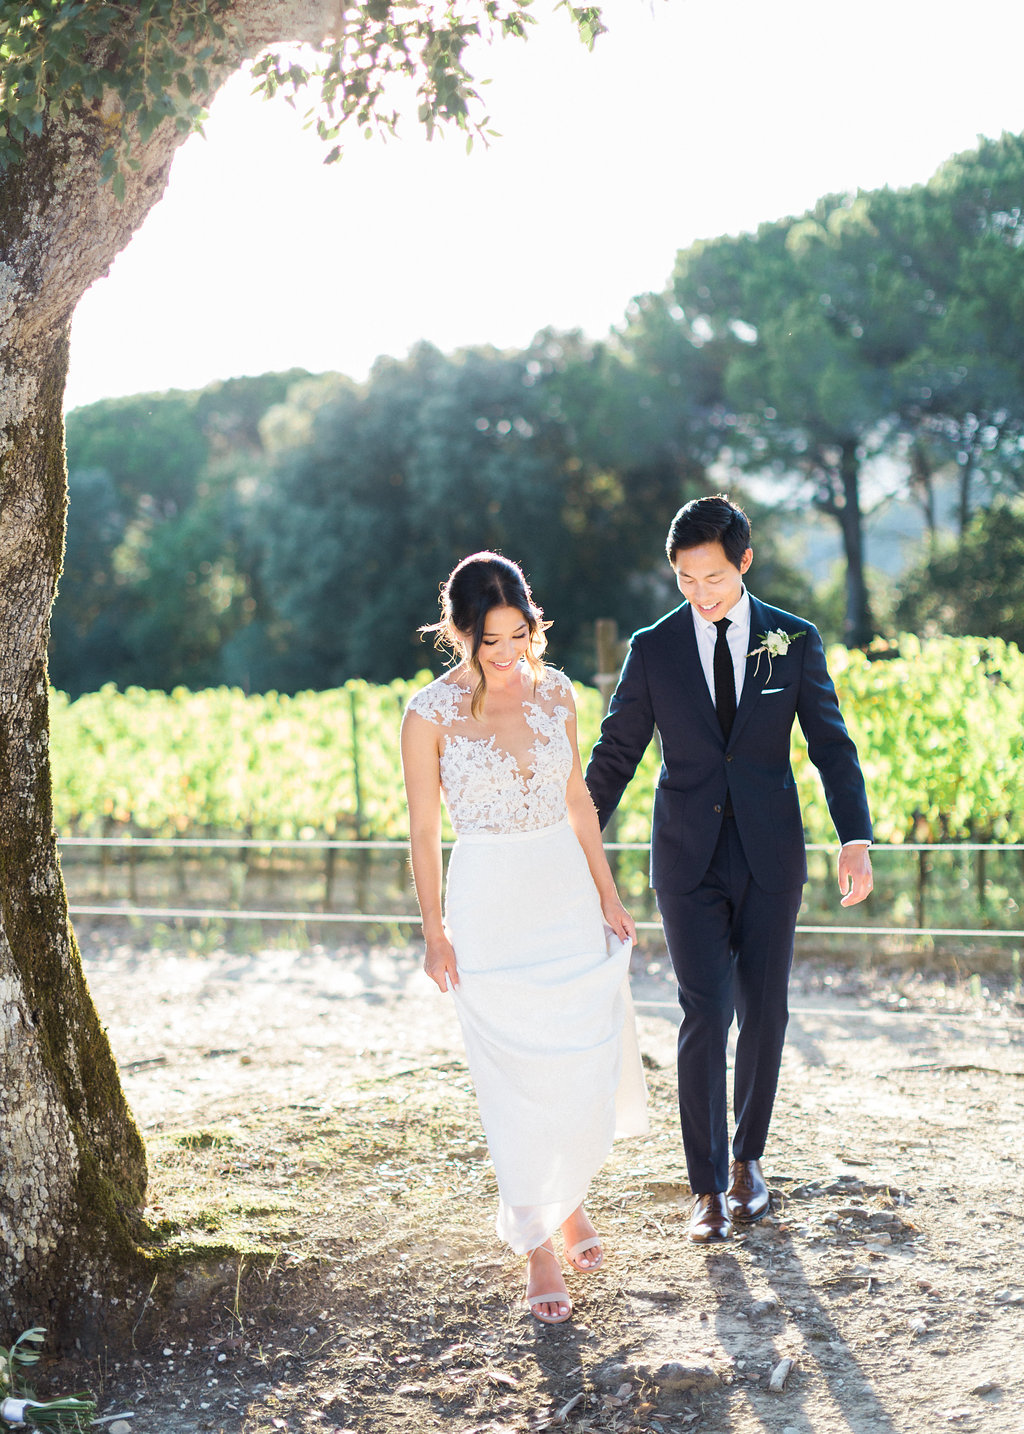 Romantic & Intimate Tuscan Wedding by Adrian Wood Photography 98